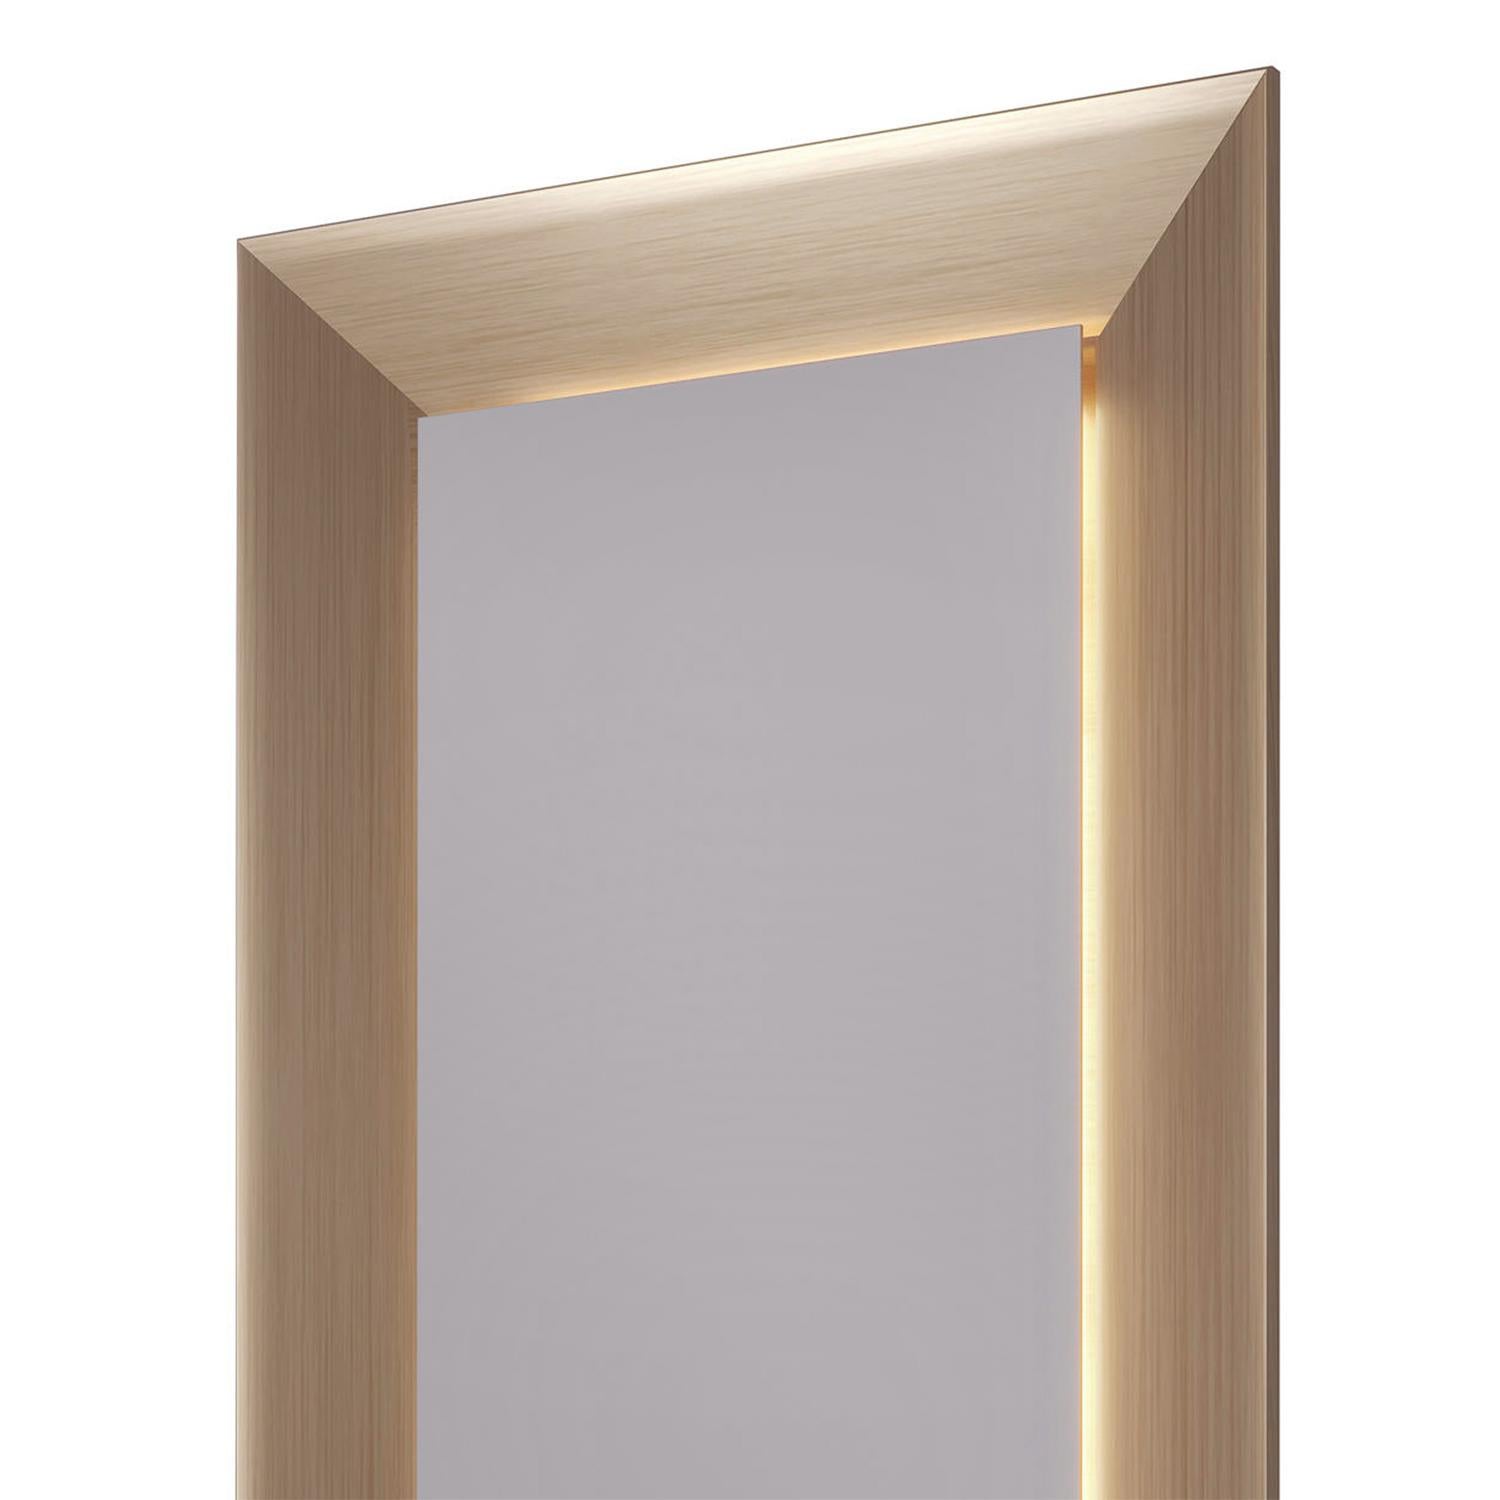 Mirror Recta gold matte with metal frame in gold brushed matte
finish and with hoctagonal mirror glass with led backlight system.